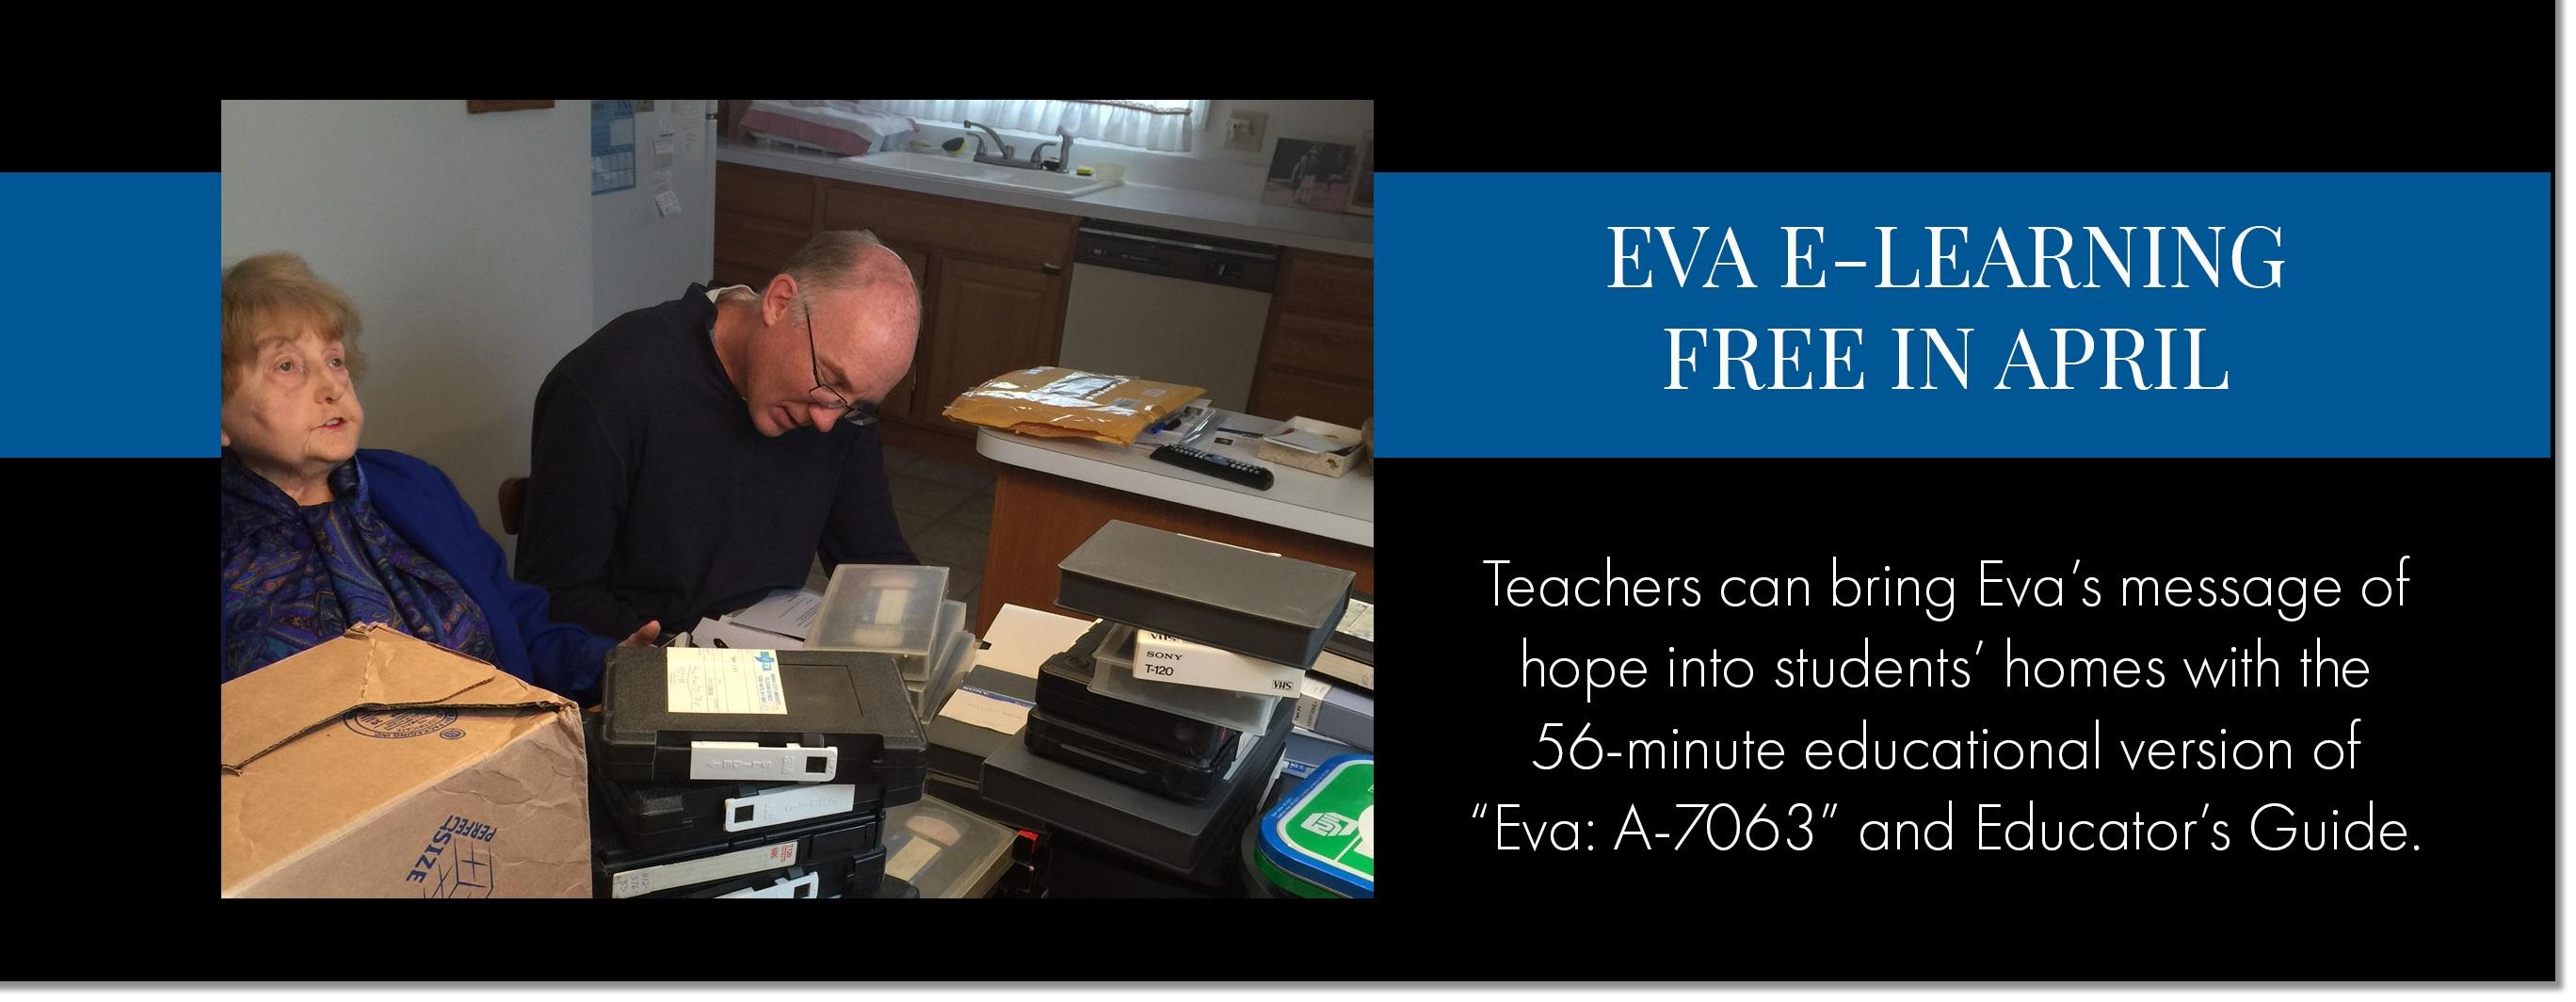 EVA E-LEARNING FREE IN APRIL Teachers can bring Eva's message of hope into students' homes with the 56-minute educational version of "Eva: A-7063" and Educator's Guide.